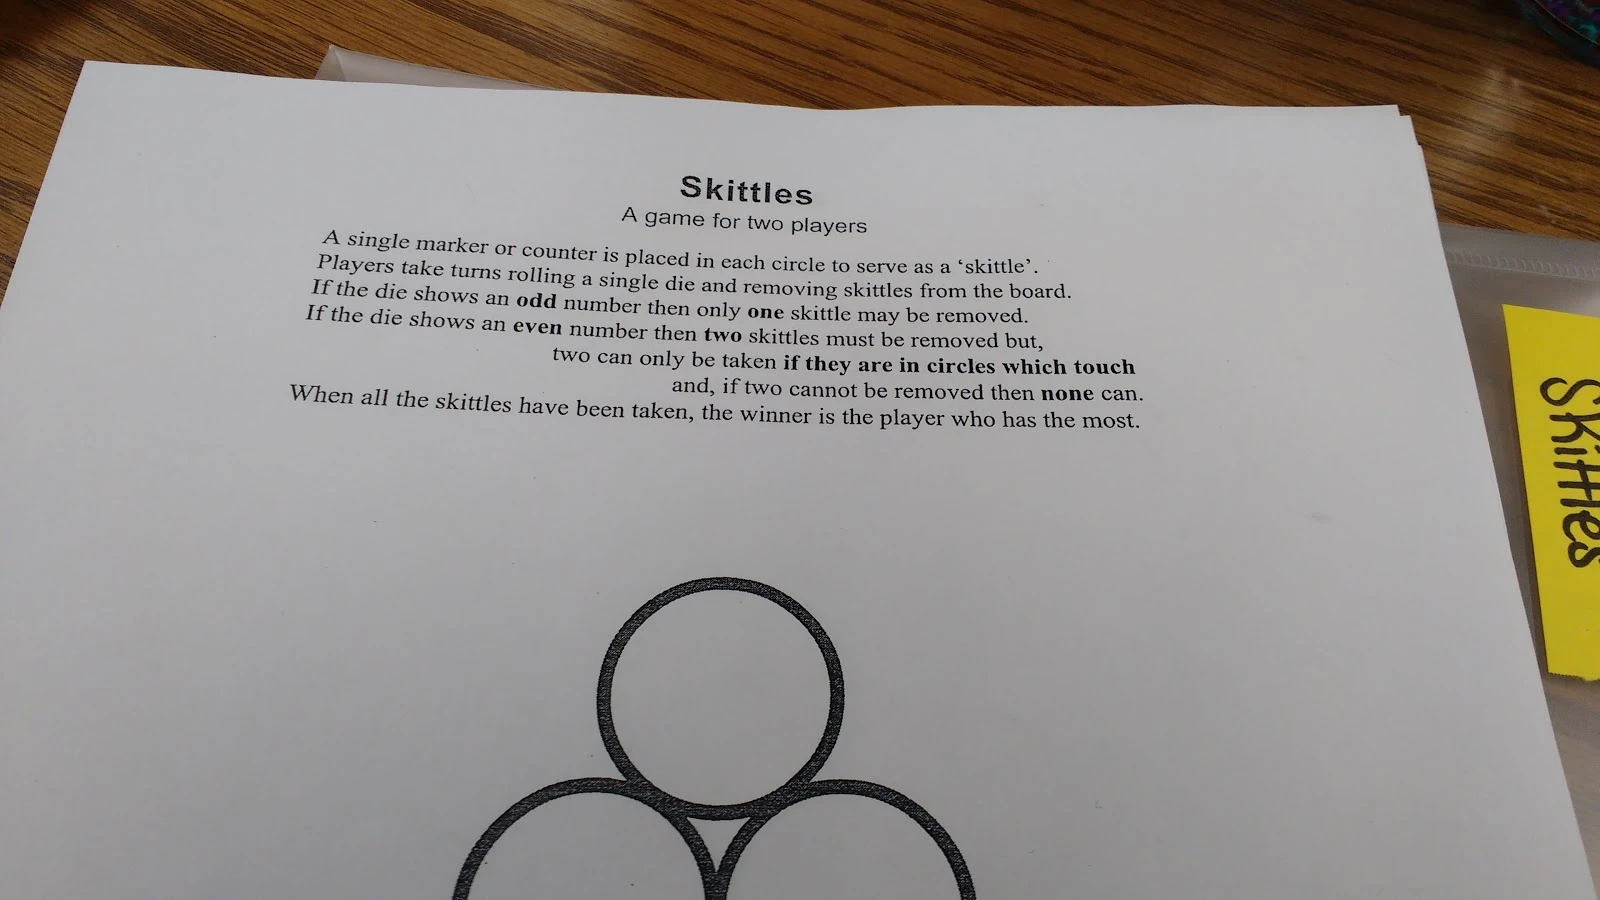 Instructions for Skittles Game - A Dice Game by Frank Tapson